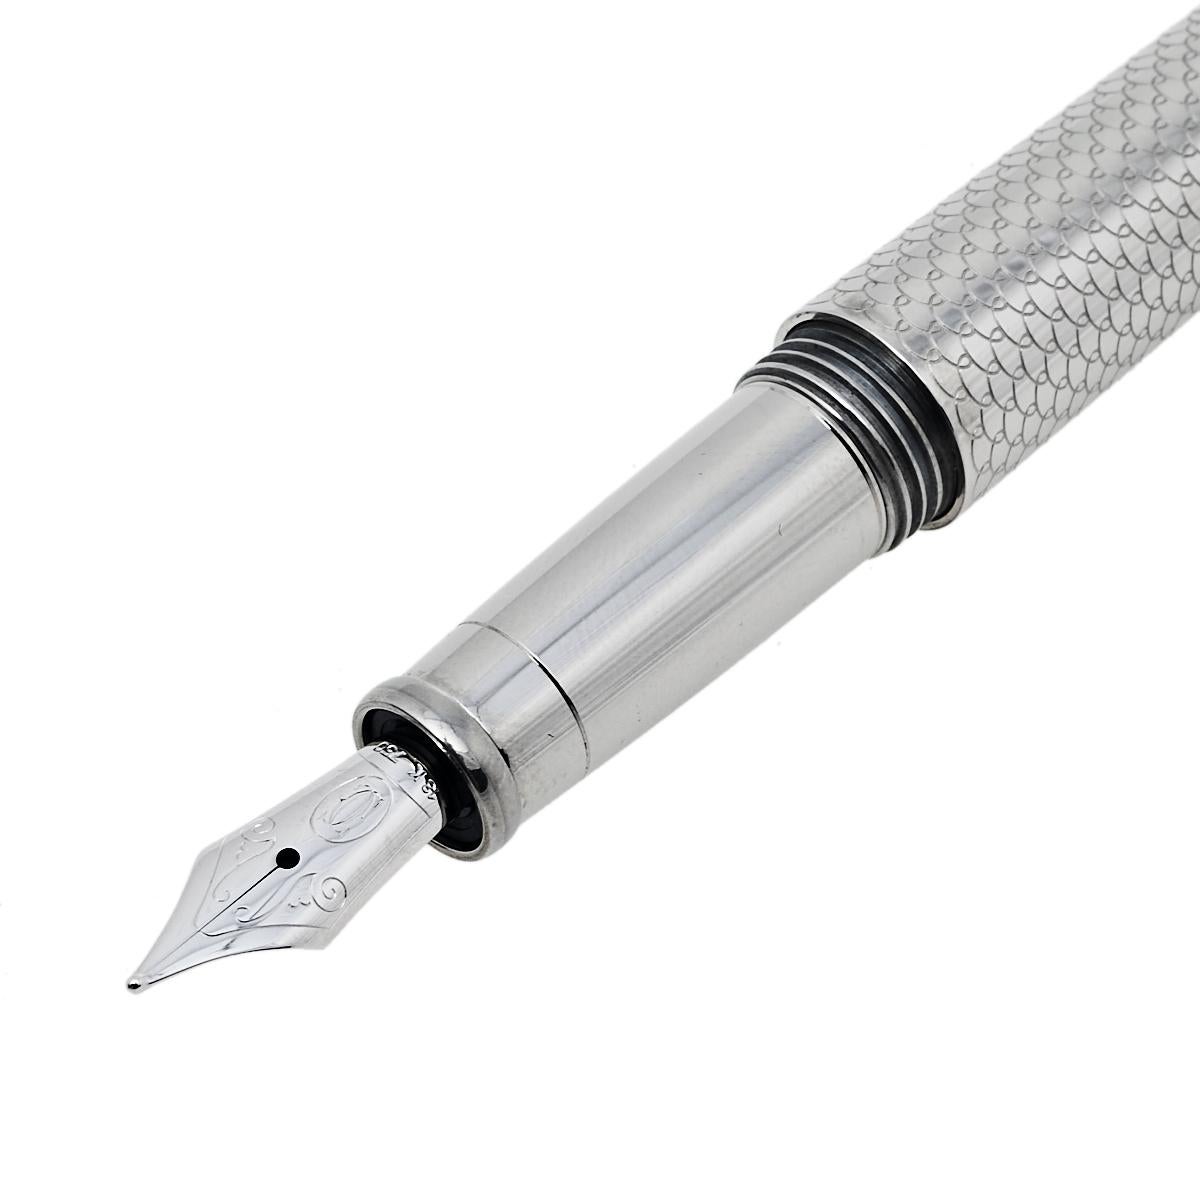 Let your dream of owning a fine pen come alive with this masterpiece from Cartier! It is a part of the brand's Trinity De Cartier collection and comes crafted from palladium hardware and adorned with a 'Resille' decor pattern that looks